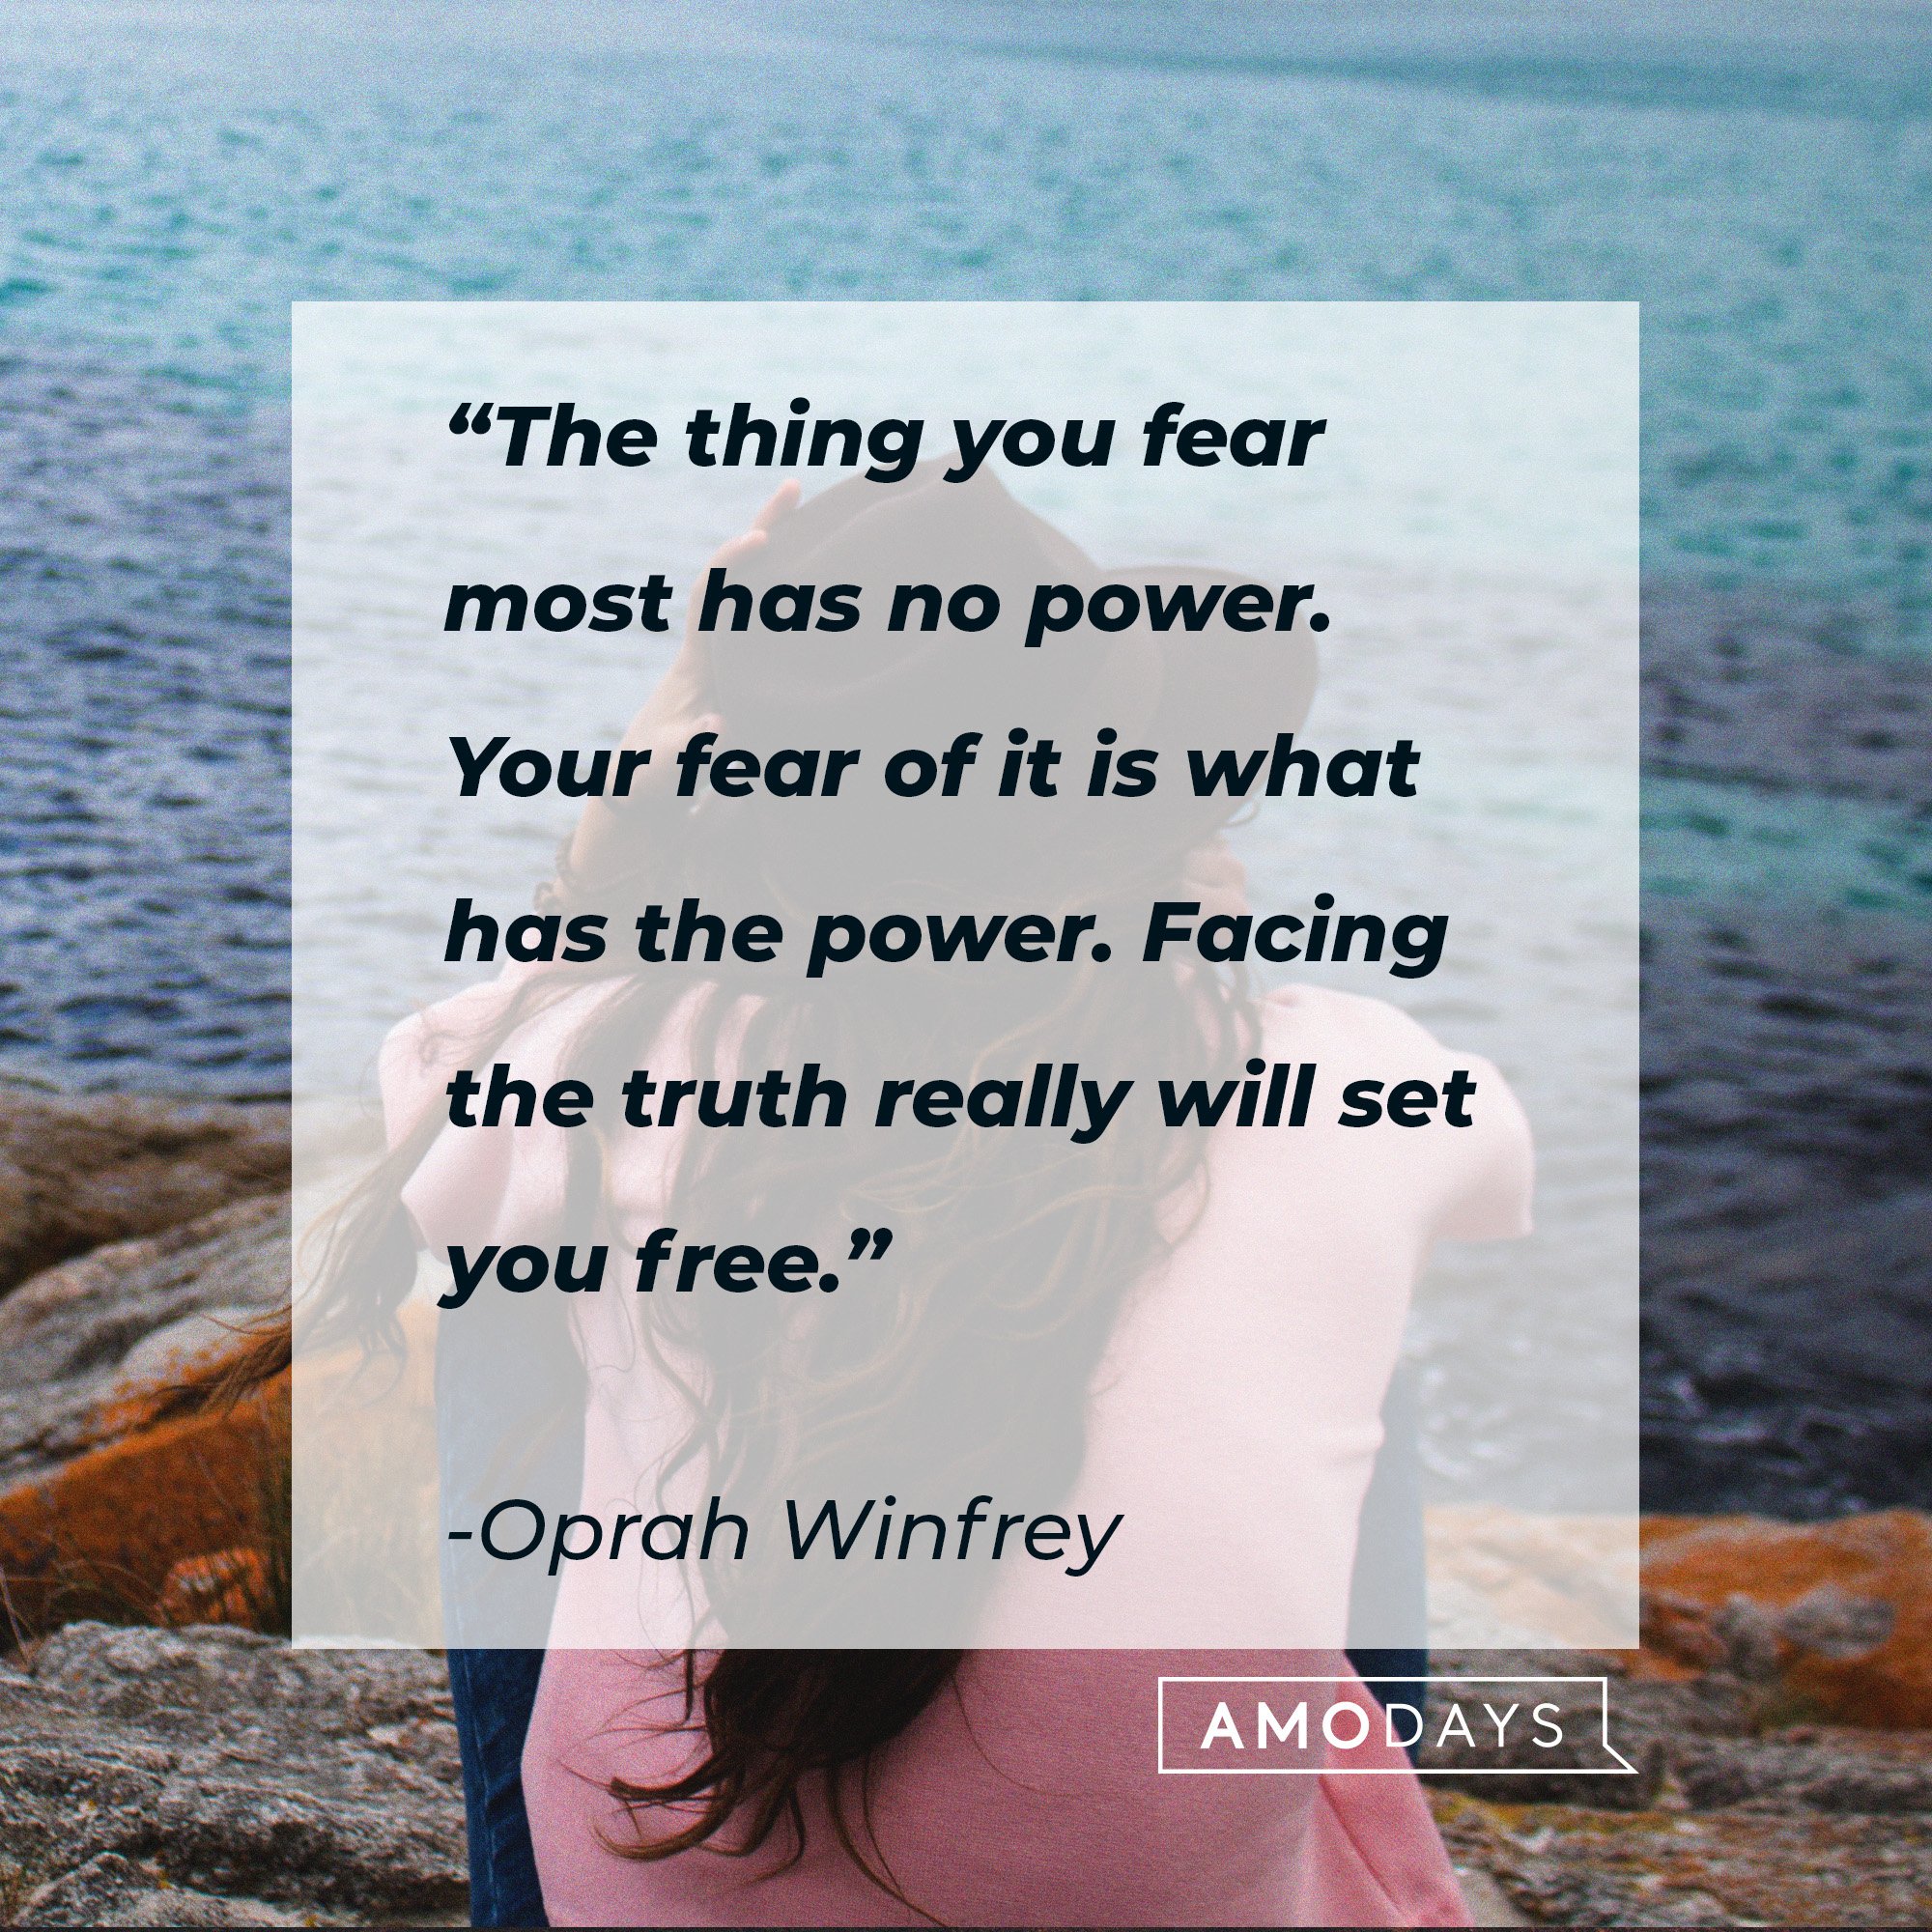 Oprah Winfrey's quote: “The thing you fear most has no power. Your fear of it is what has the power. Facing the truth really will set you free.” | Image: AmoDays